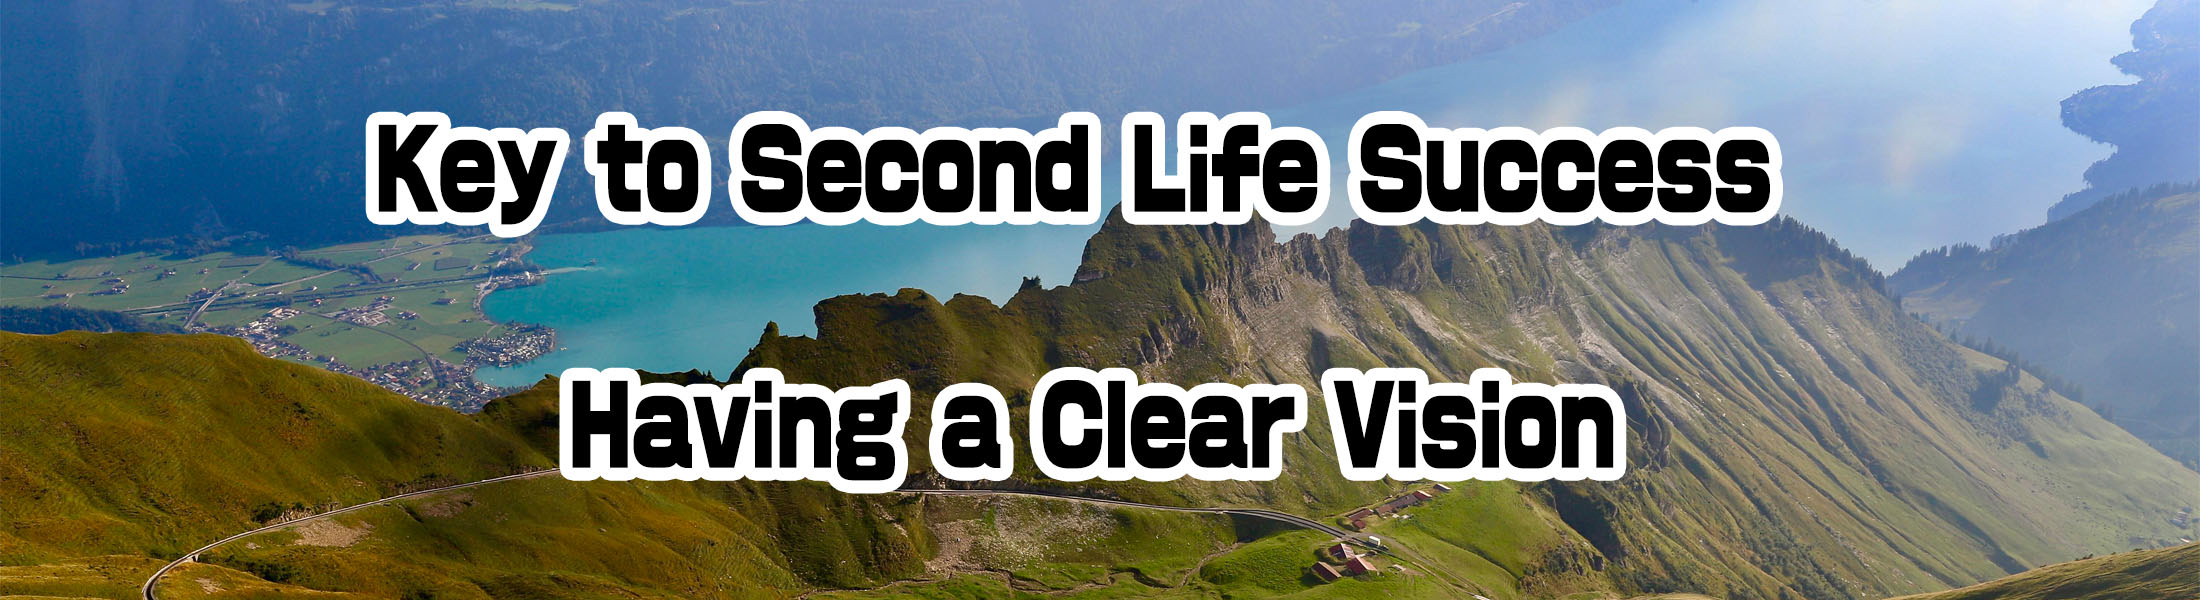 The Idea that Life is Not Wasted for a Second Life